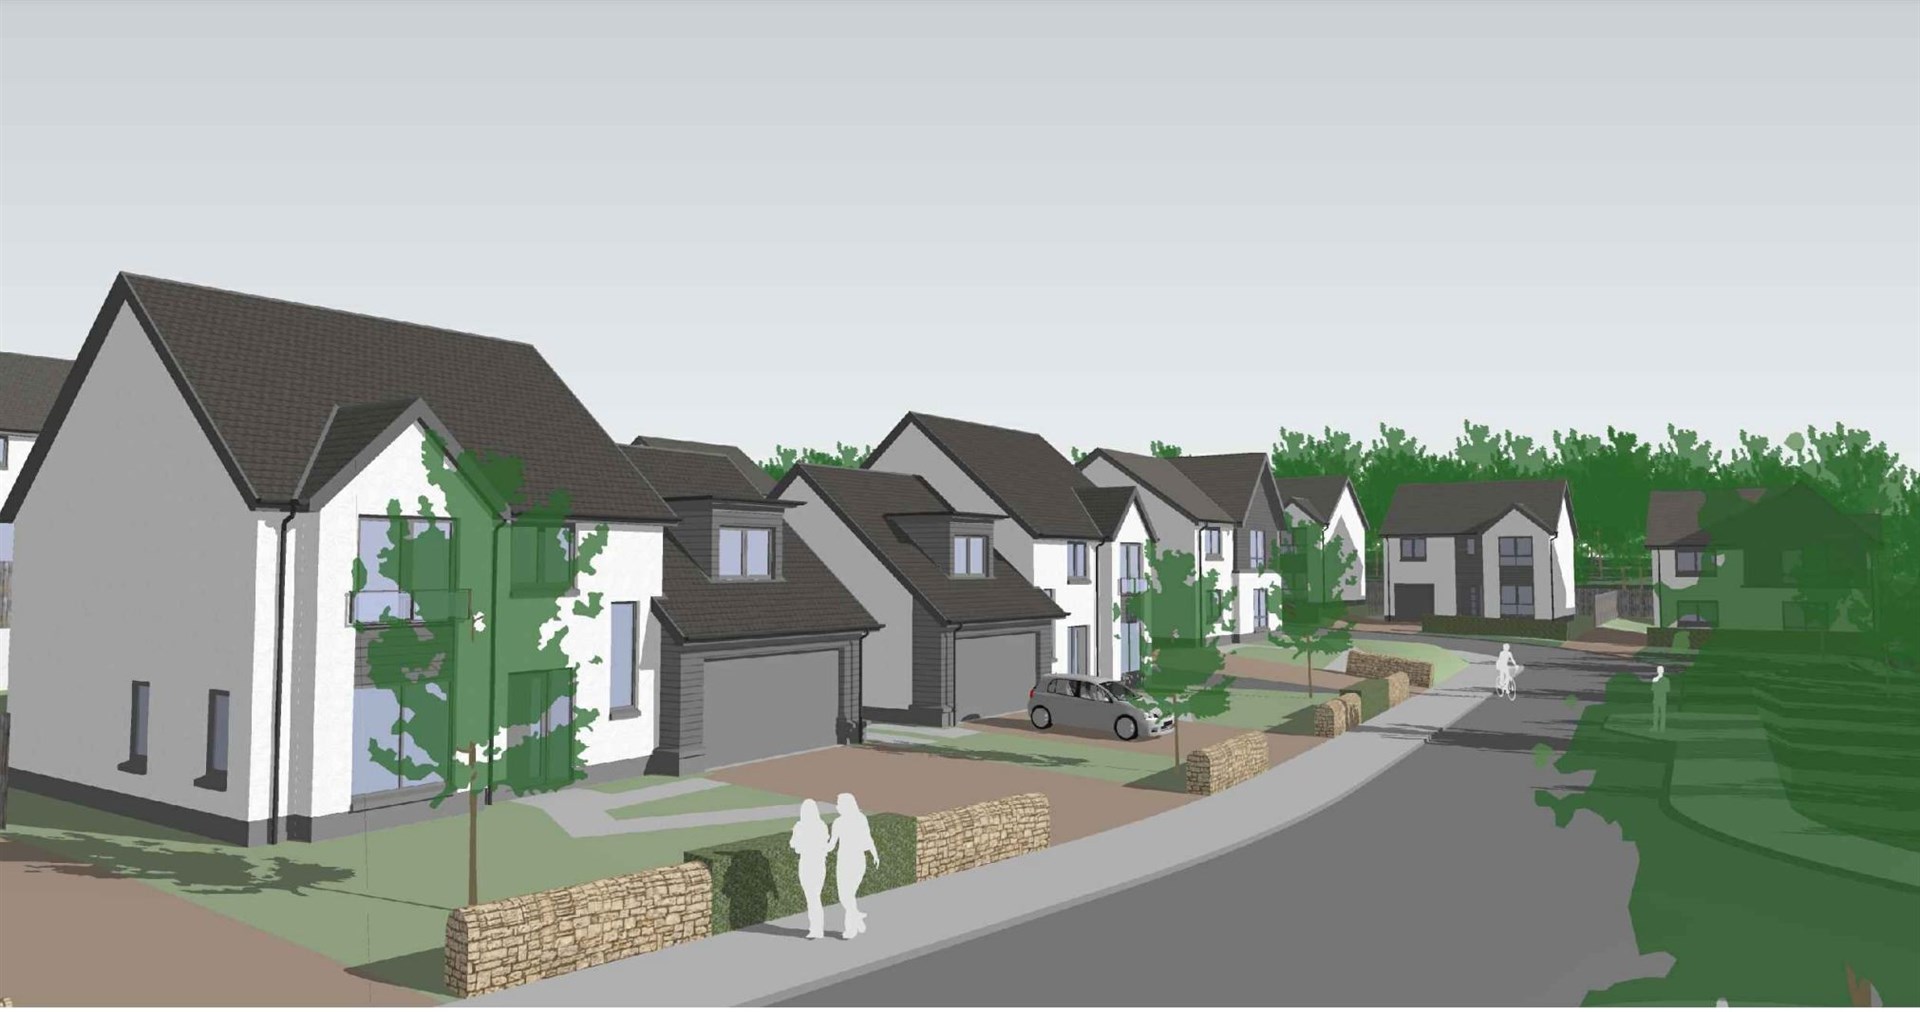 The planned development of 28 new houses in Conon Bridge. Picture: Highland Council e-planning.